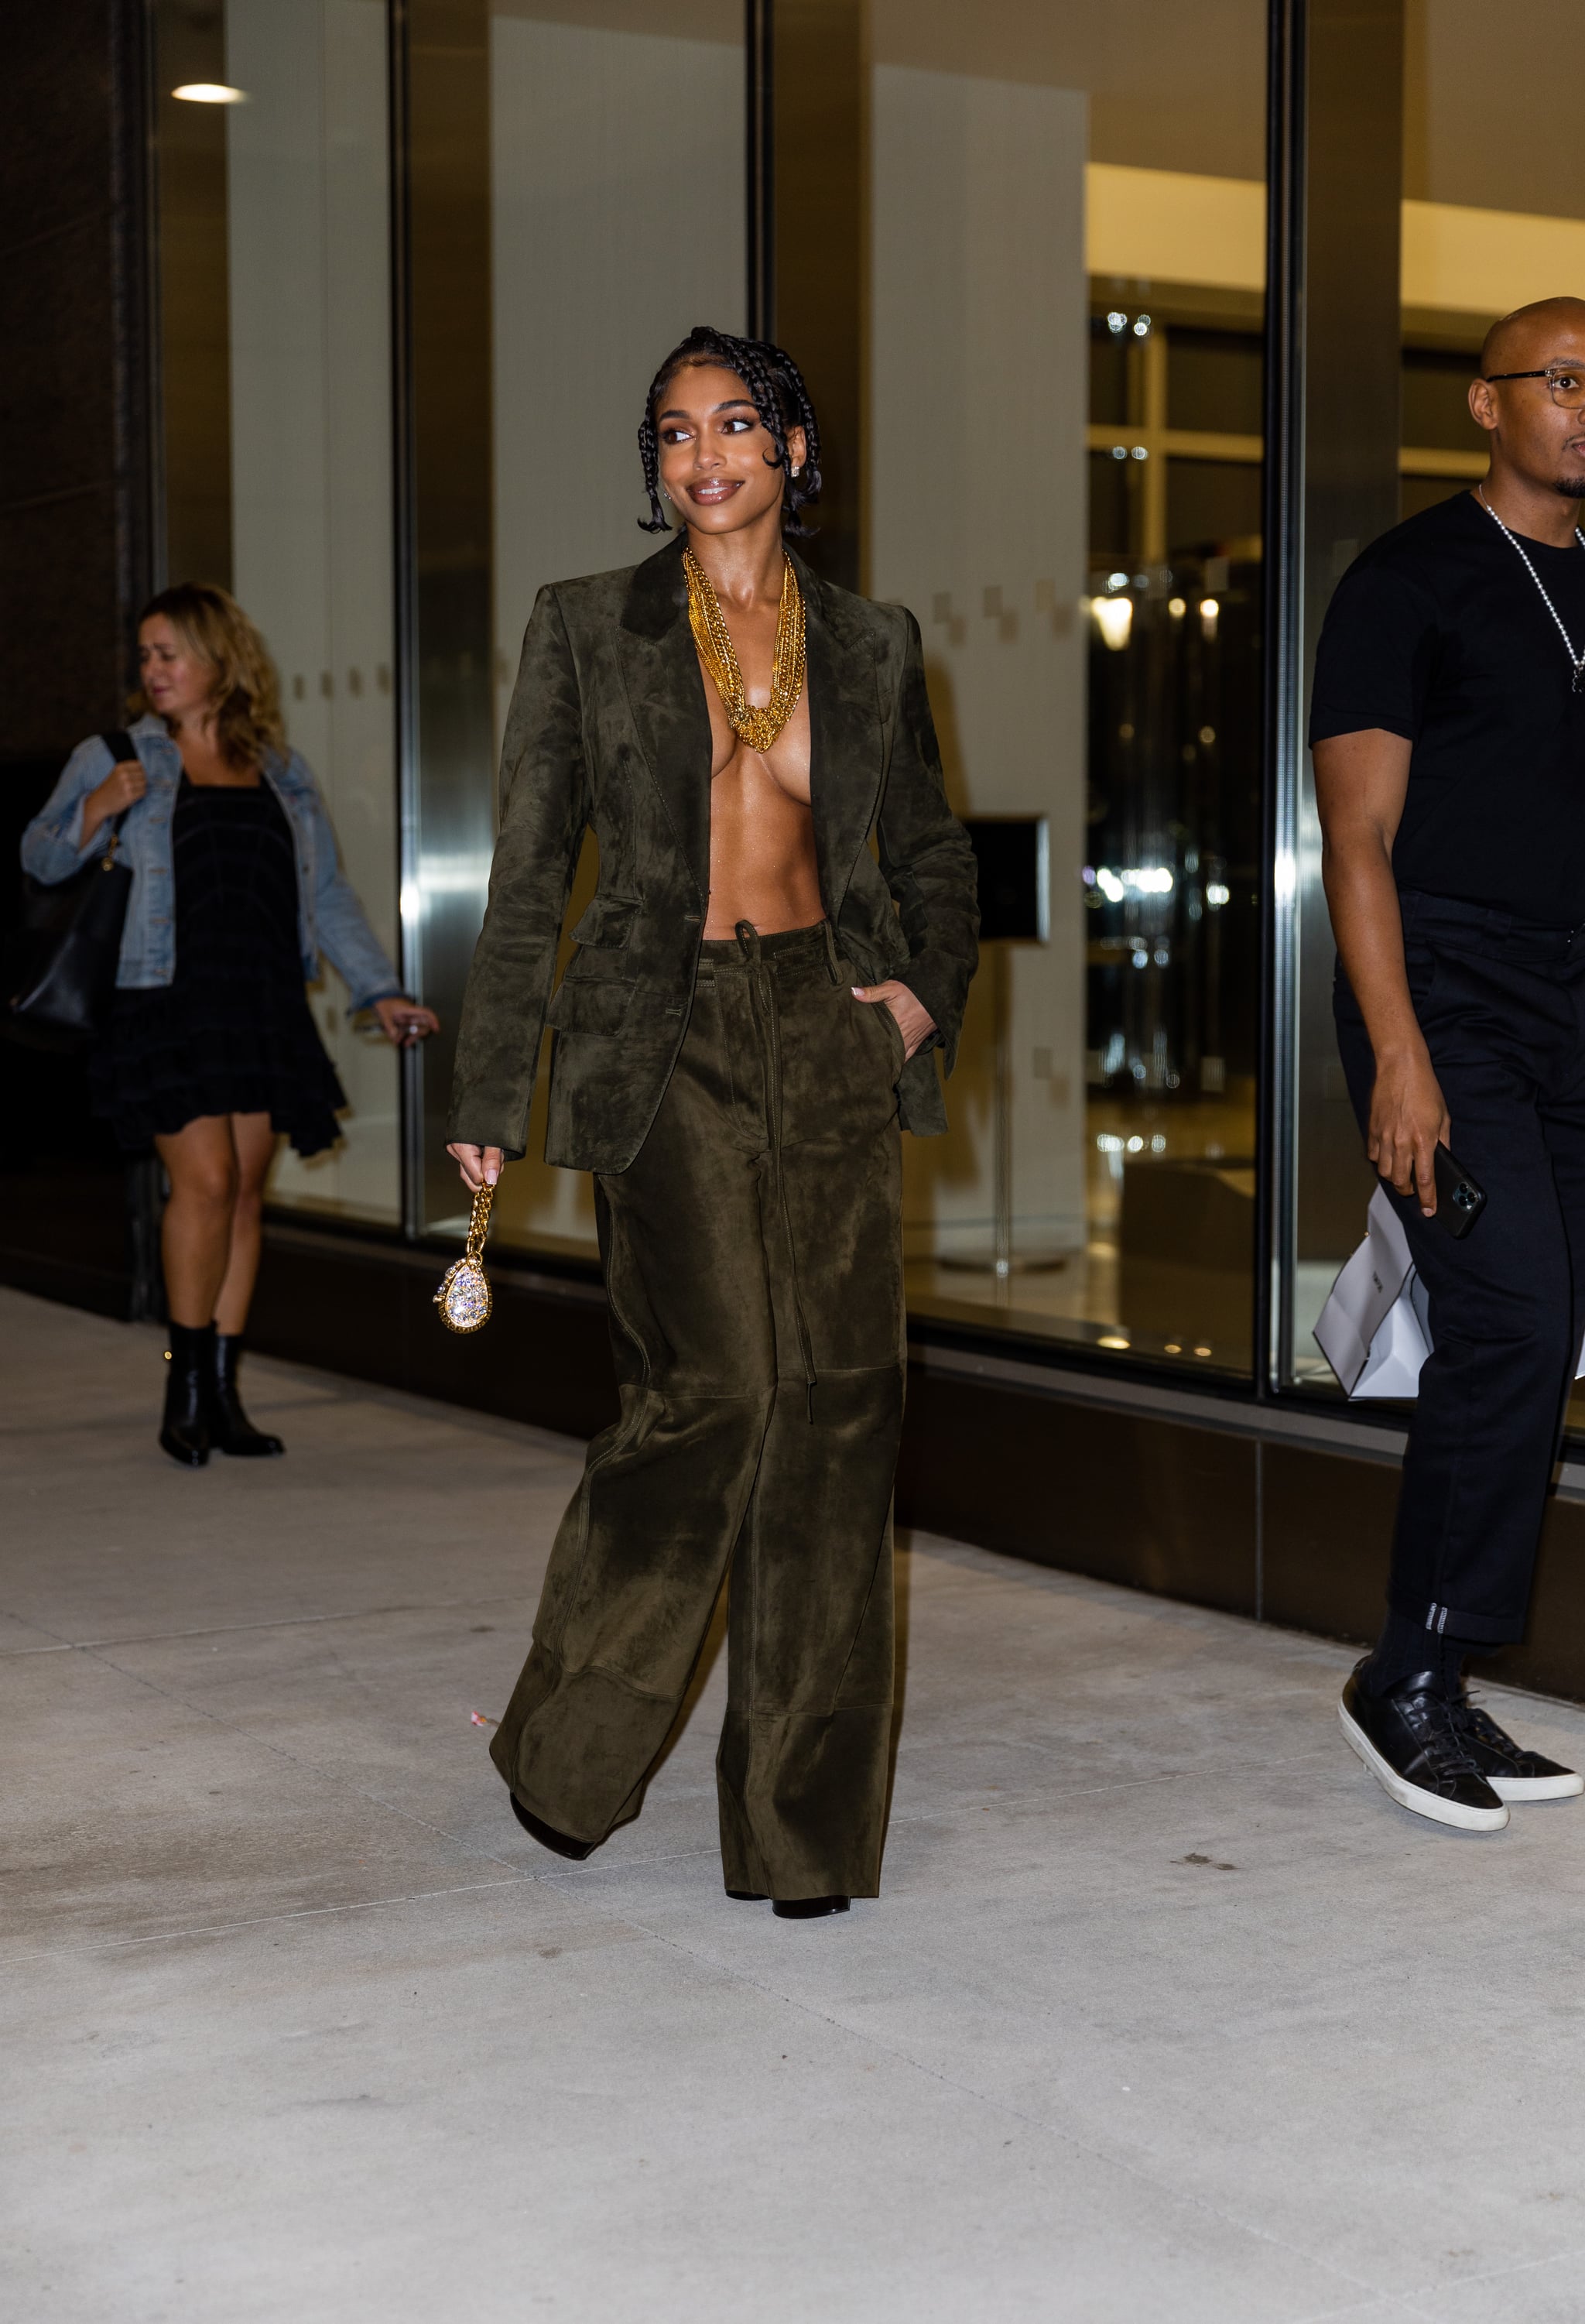 NEW YORK, NY - SEPTEMBER 14: Lori Harvey wearing a khaki blazer and pants and micro bag outside Tom Ford in New York City on September 14, 2022. (Photo by Christian Vierig/Getty Images)